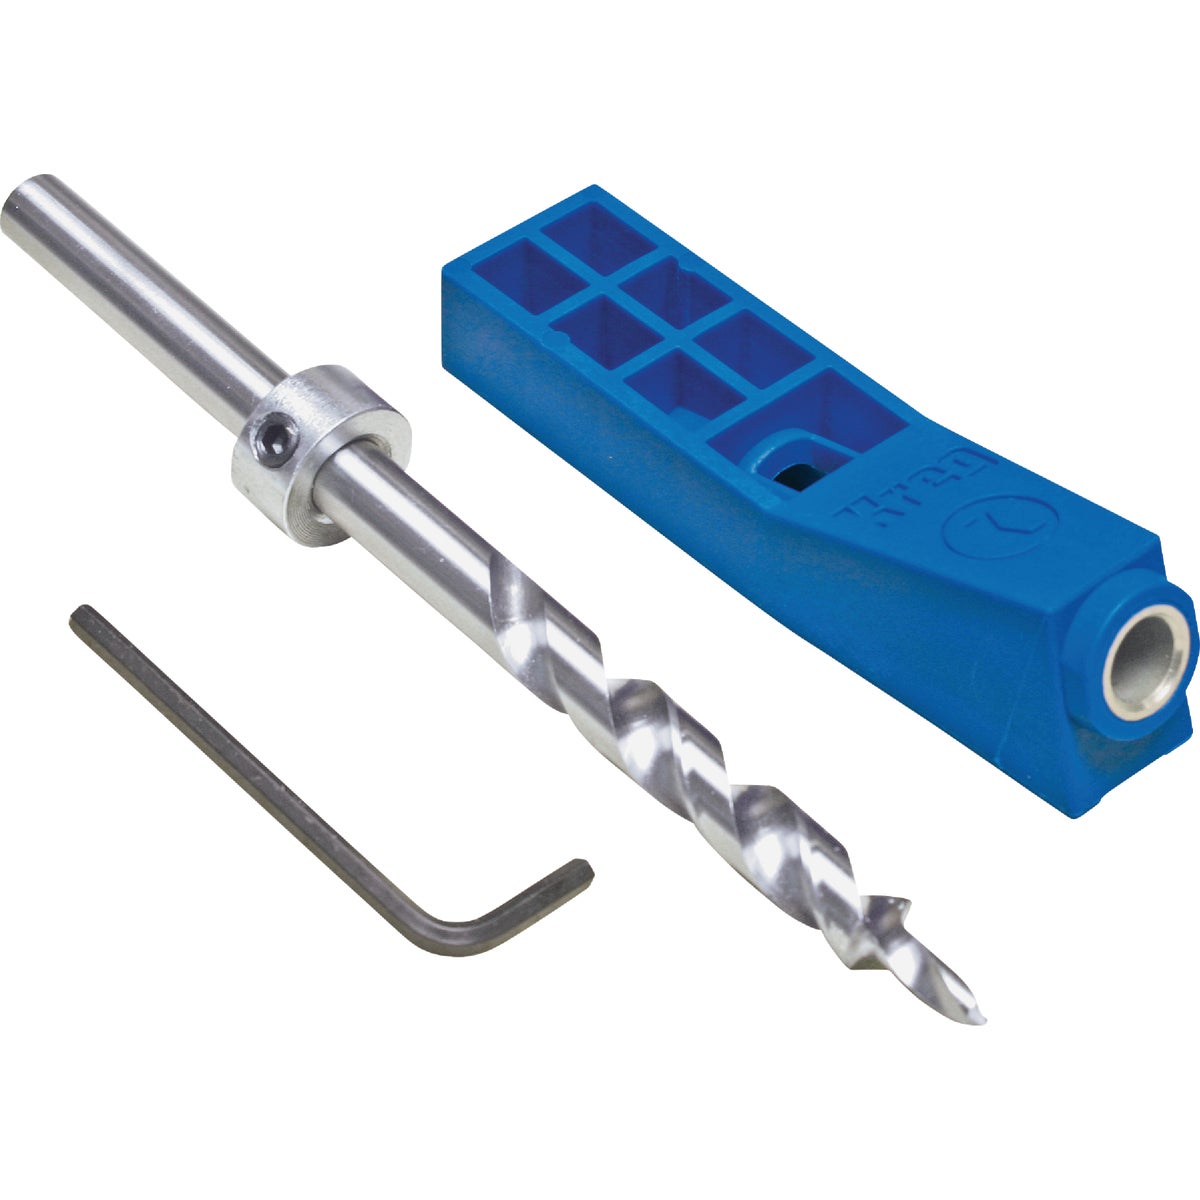 Item 320064, The Kreg Pocket-Hole Jig Mini is good for very specific applications where 